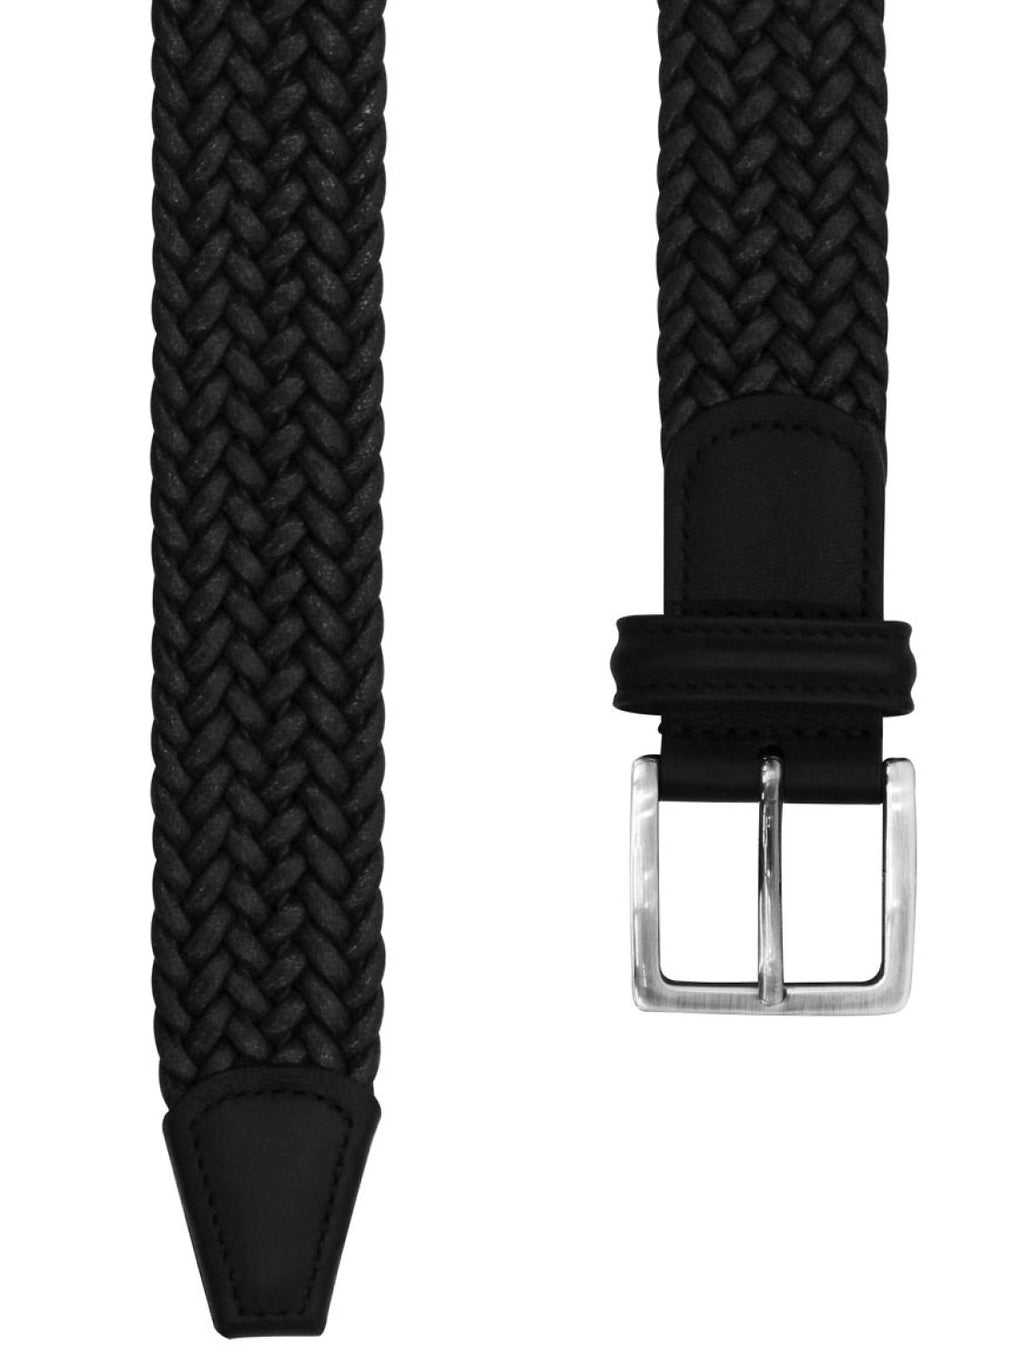 Anderson’s Waxed Leather-Trimmed Woven Belt Black | B